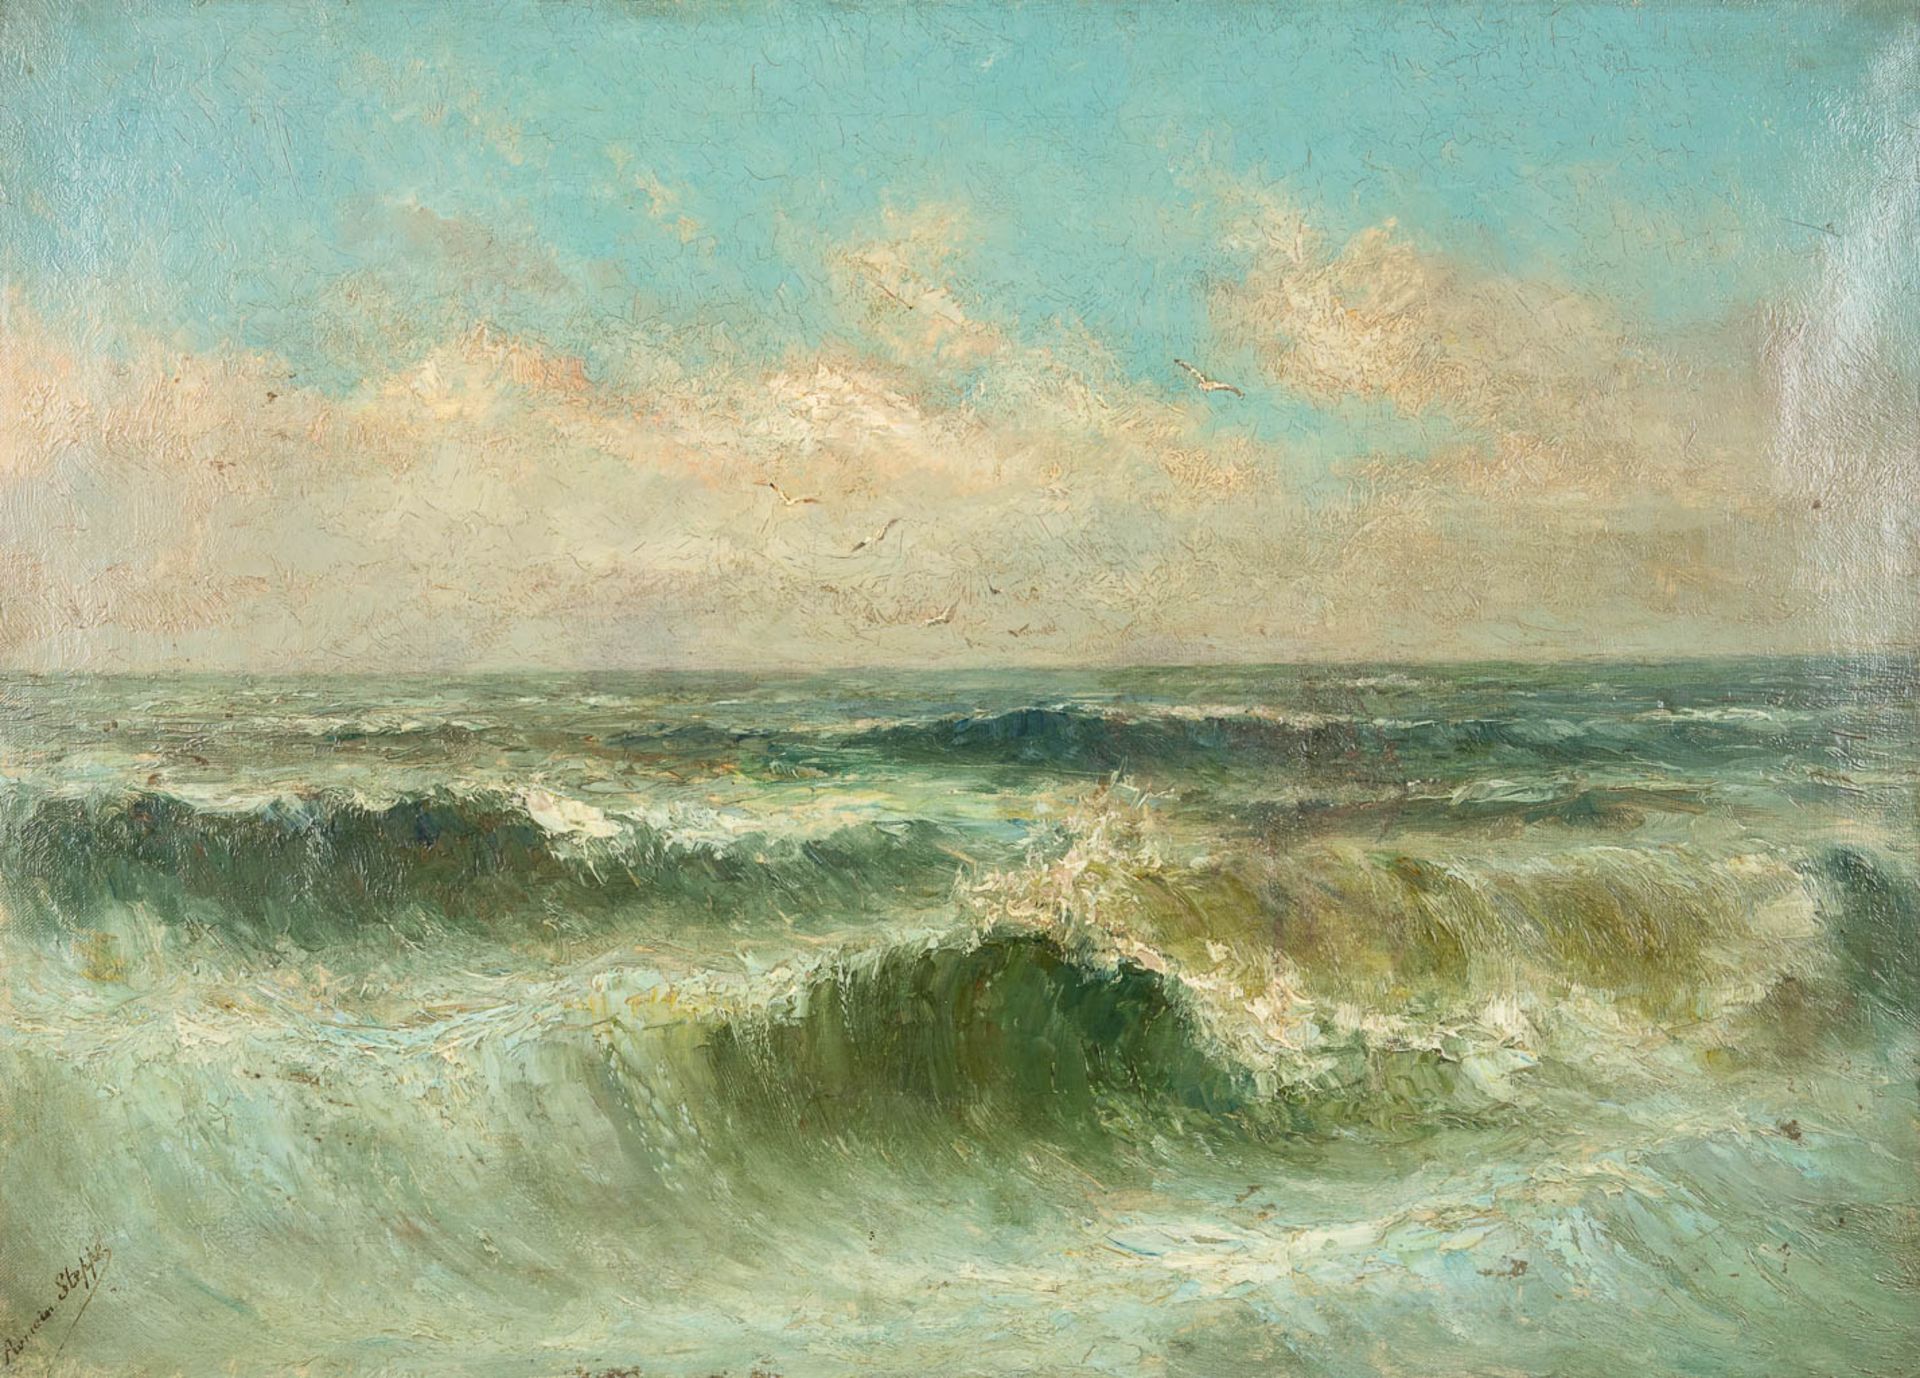 Romain STEPPE (1859-1927) 'View of the North Sea' oil on canvas. (W:69 x H:50 cm)